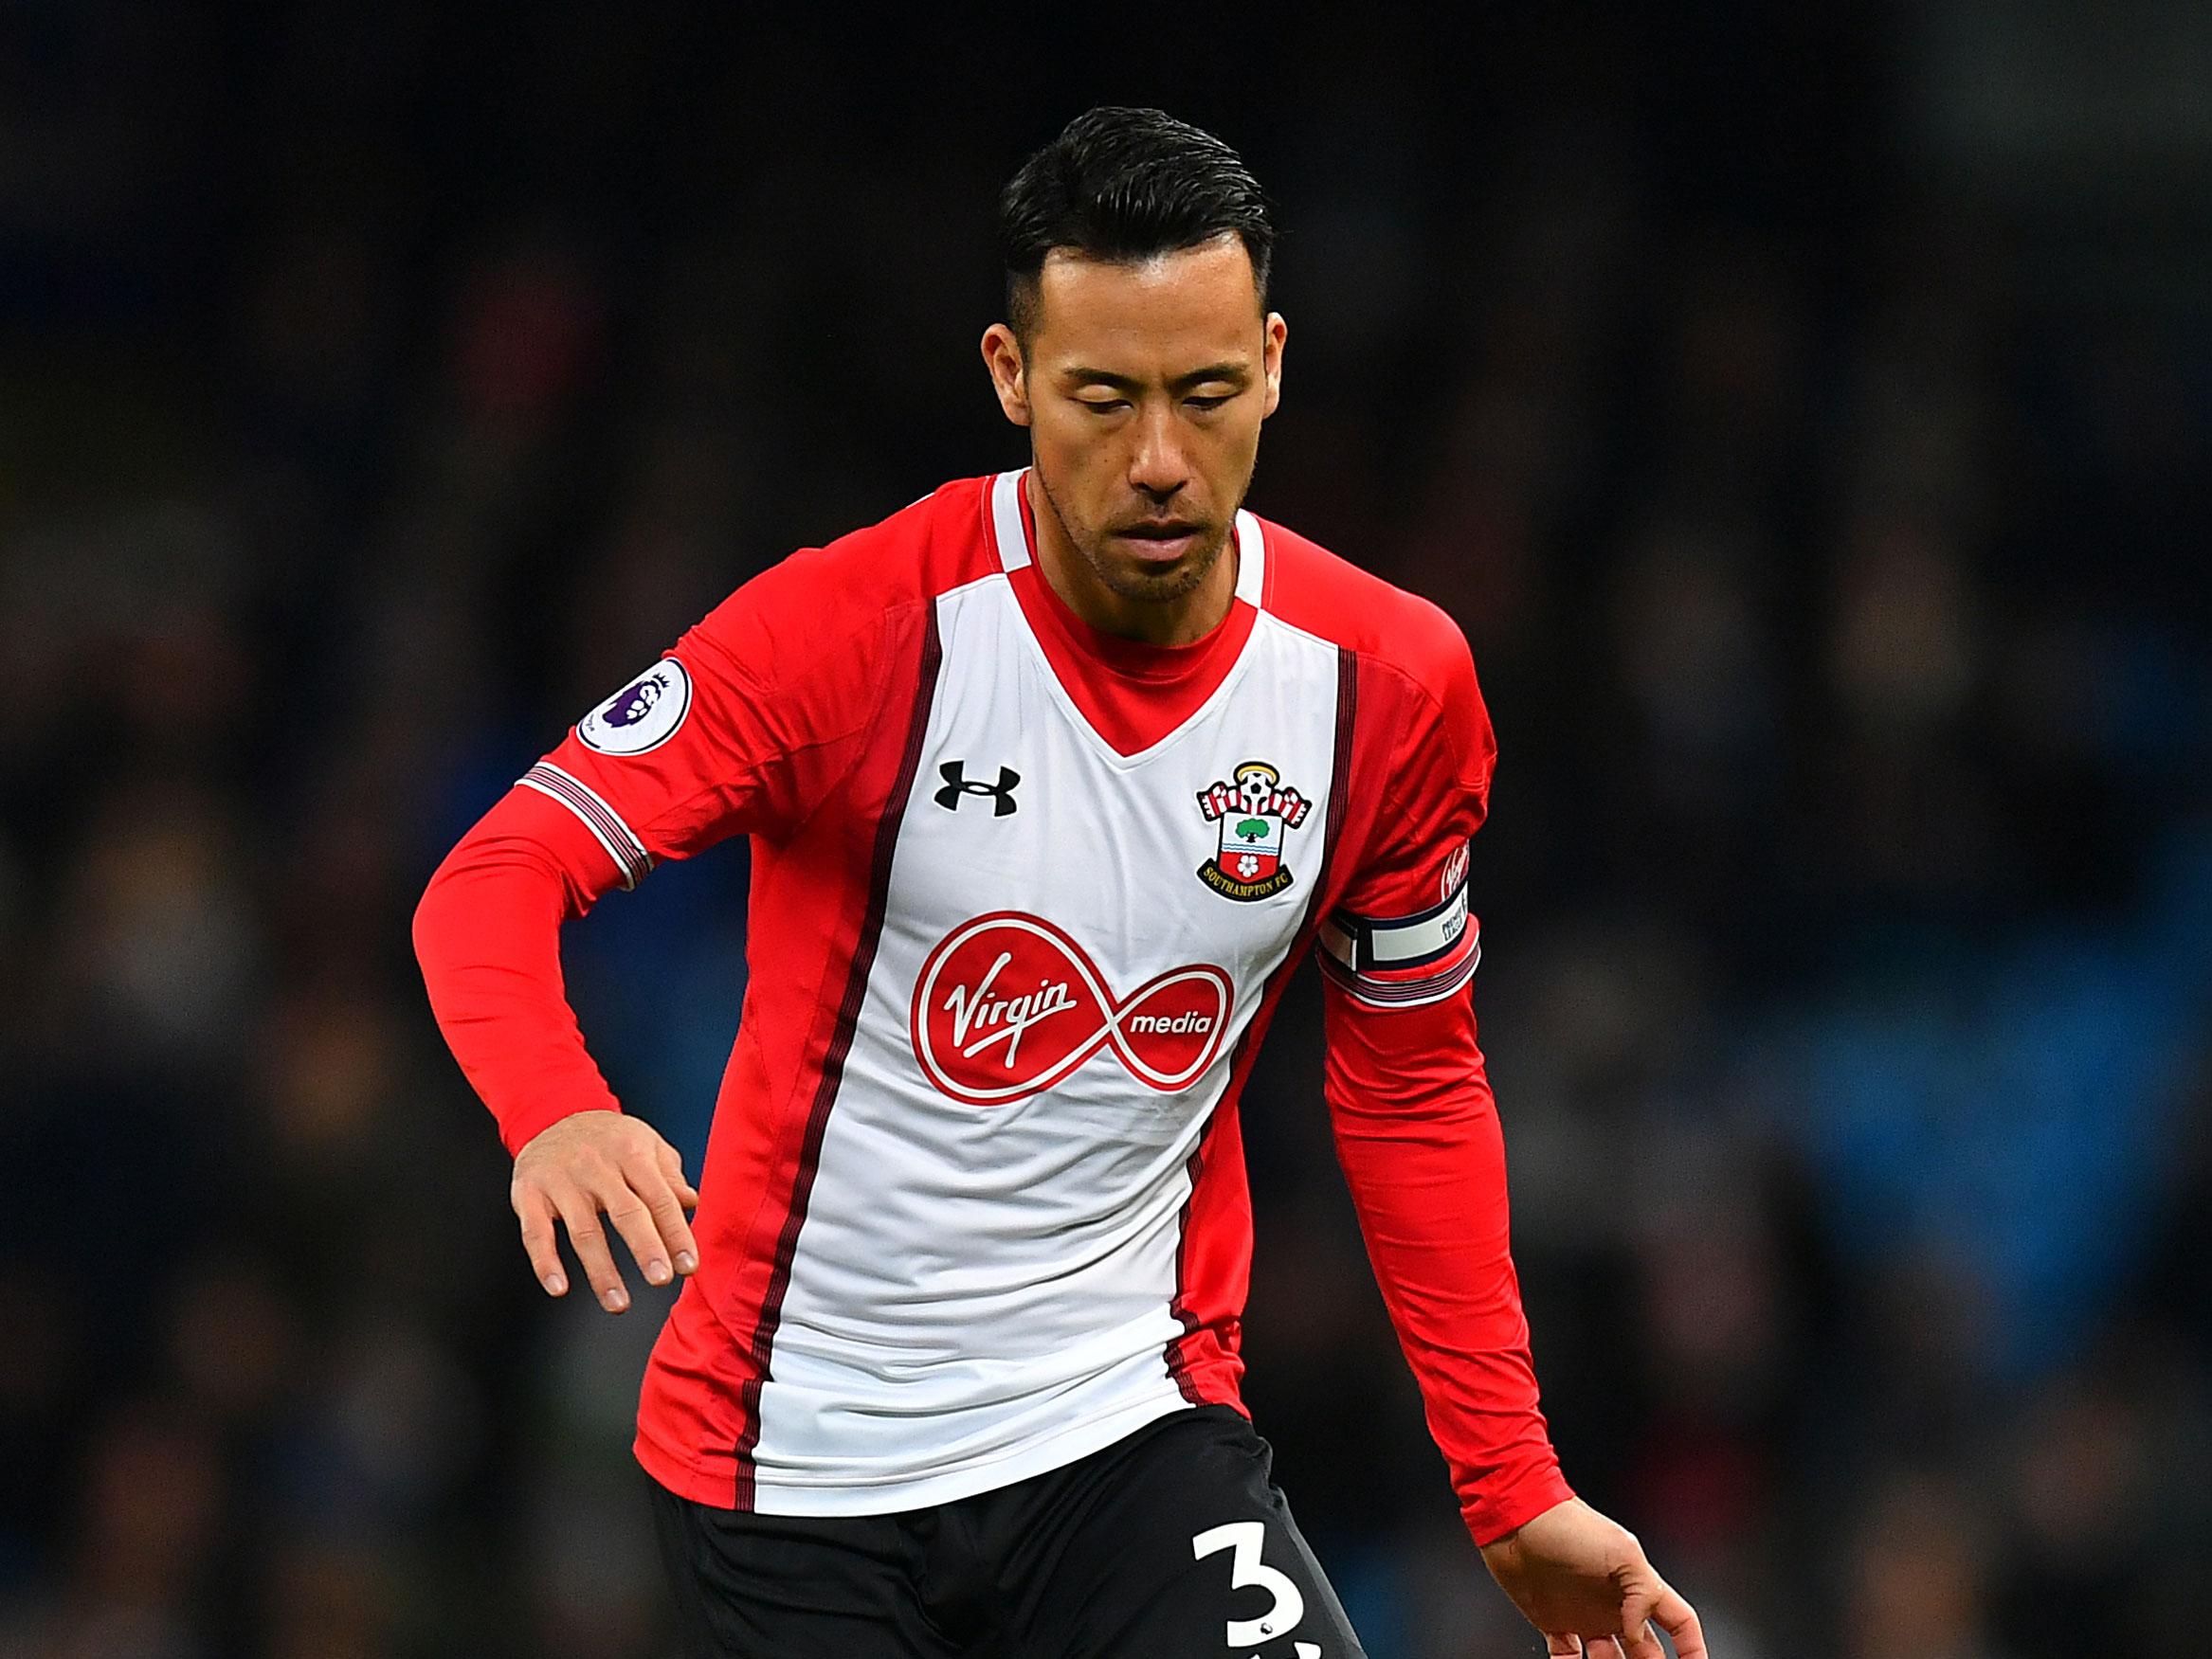 The defender is a key player for Southampton